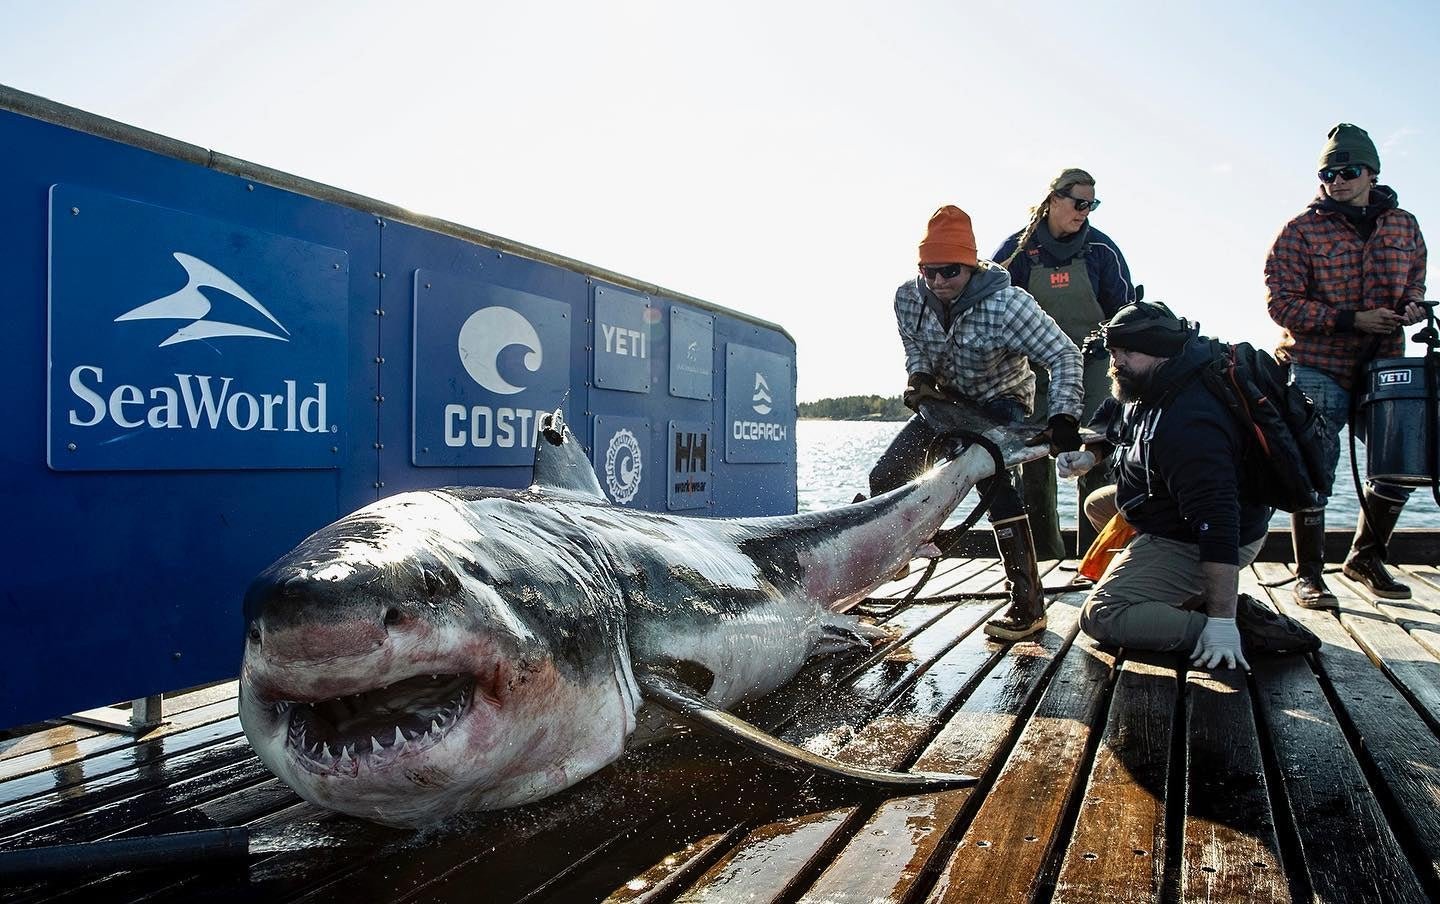 A 1,000-Pound Great White Is Cruising East Coast Waters